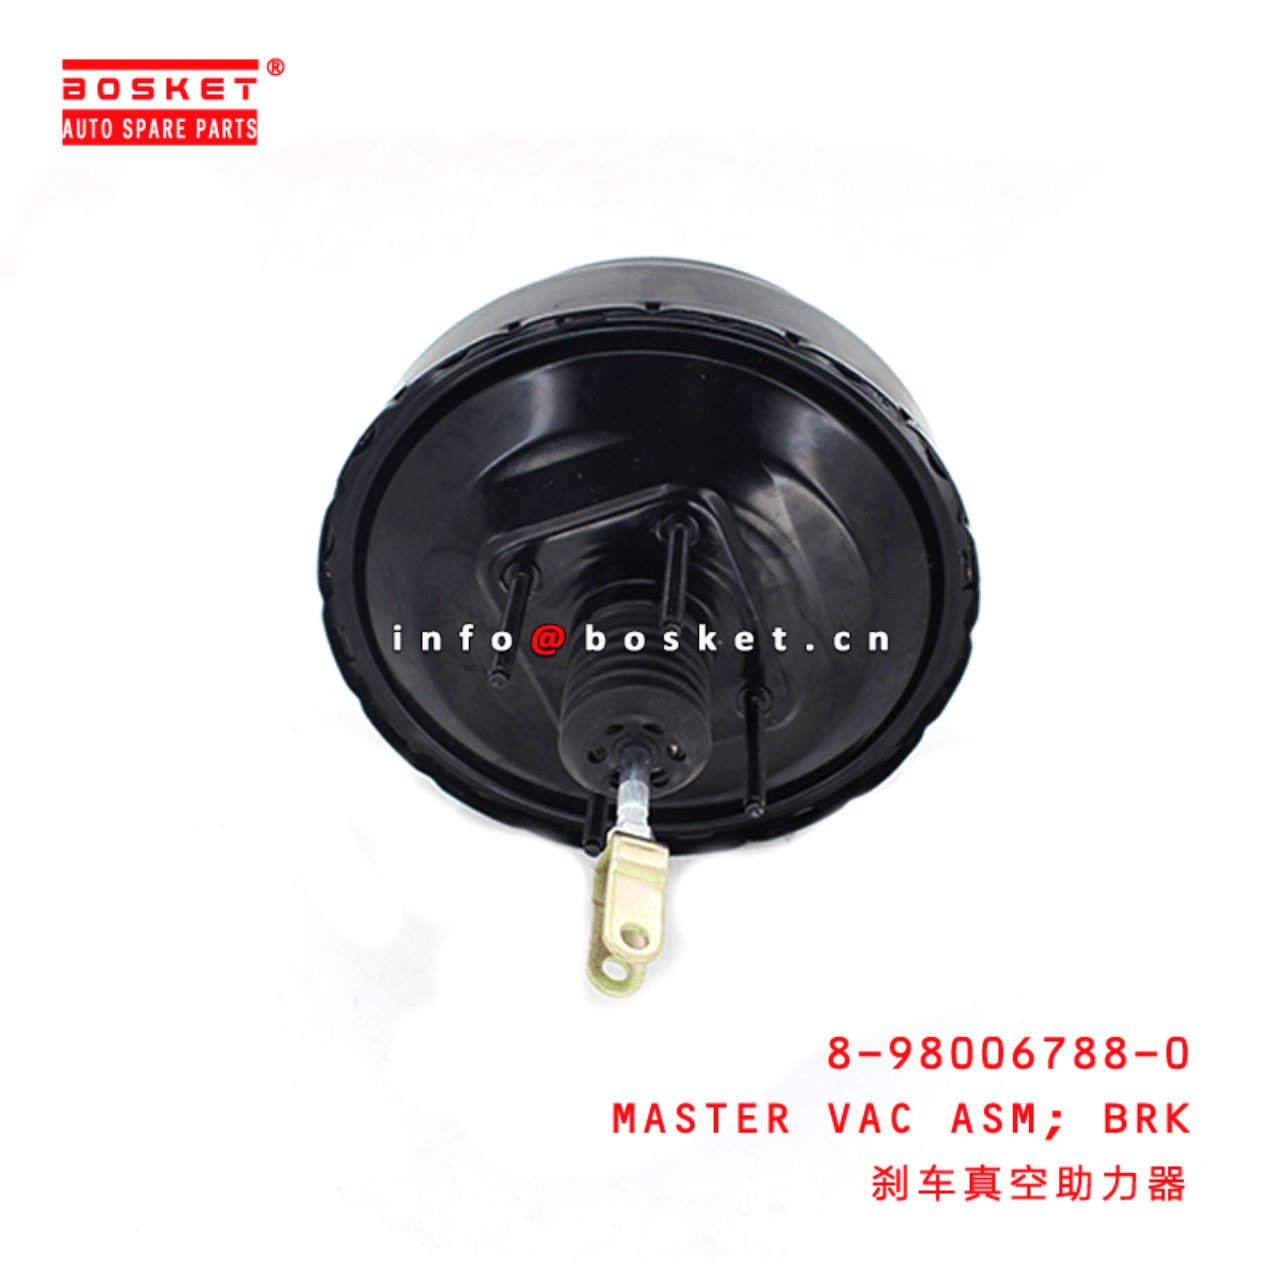 8-98006788-0 Brake Master Vac Assembly 8980067880 Suitable for ISUZU D-MAX 2007